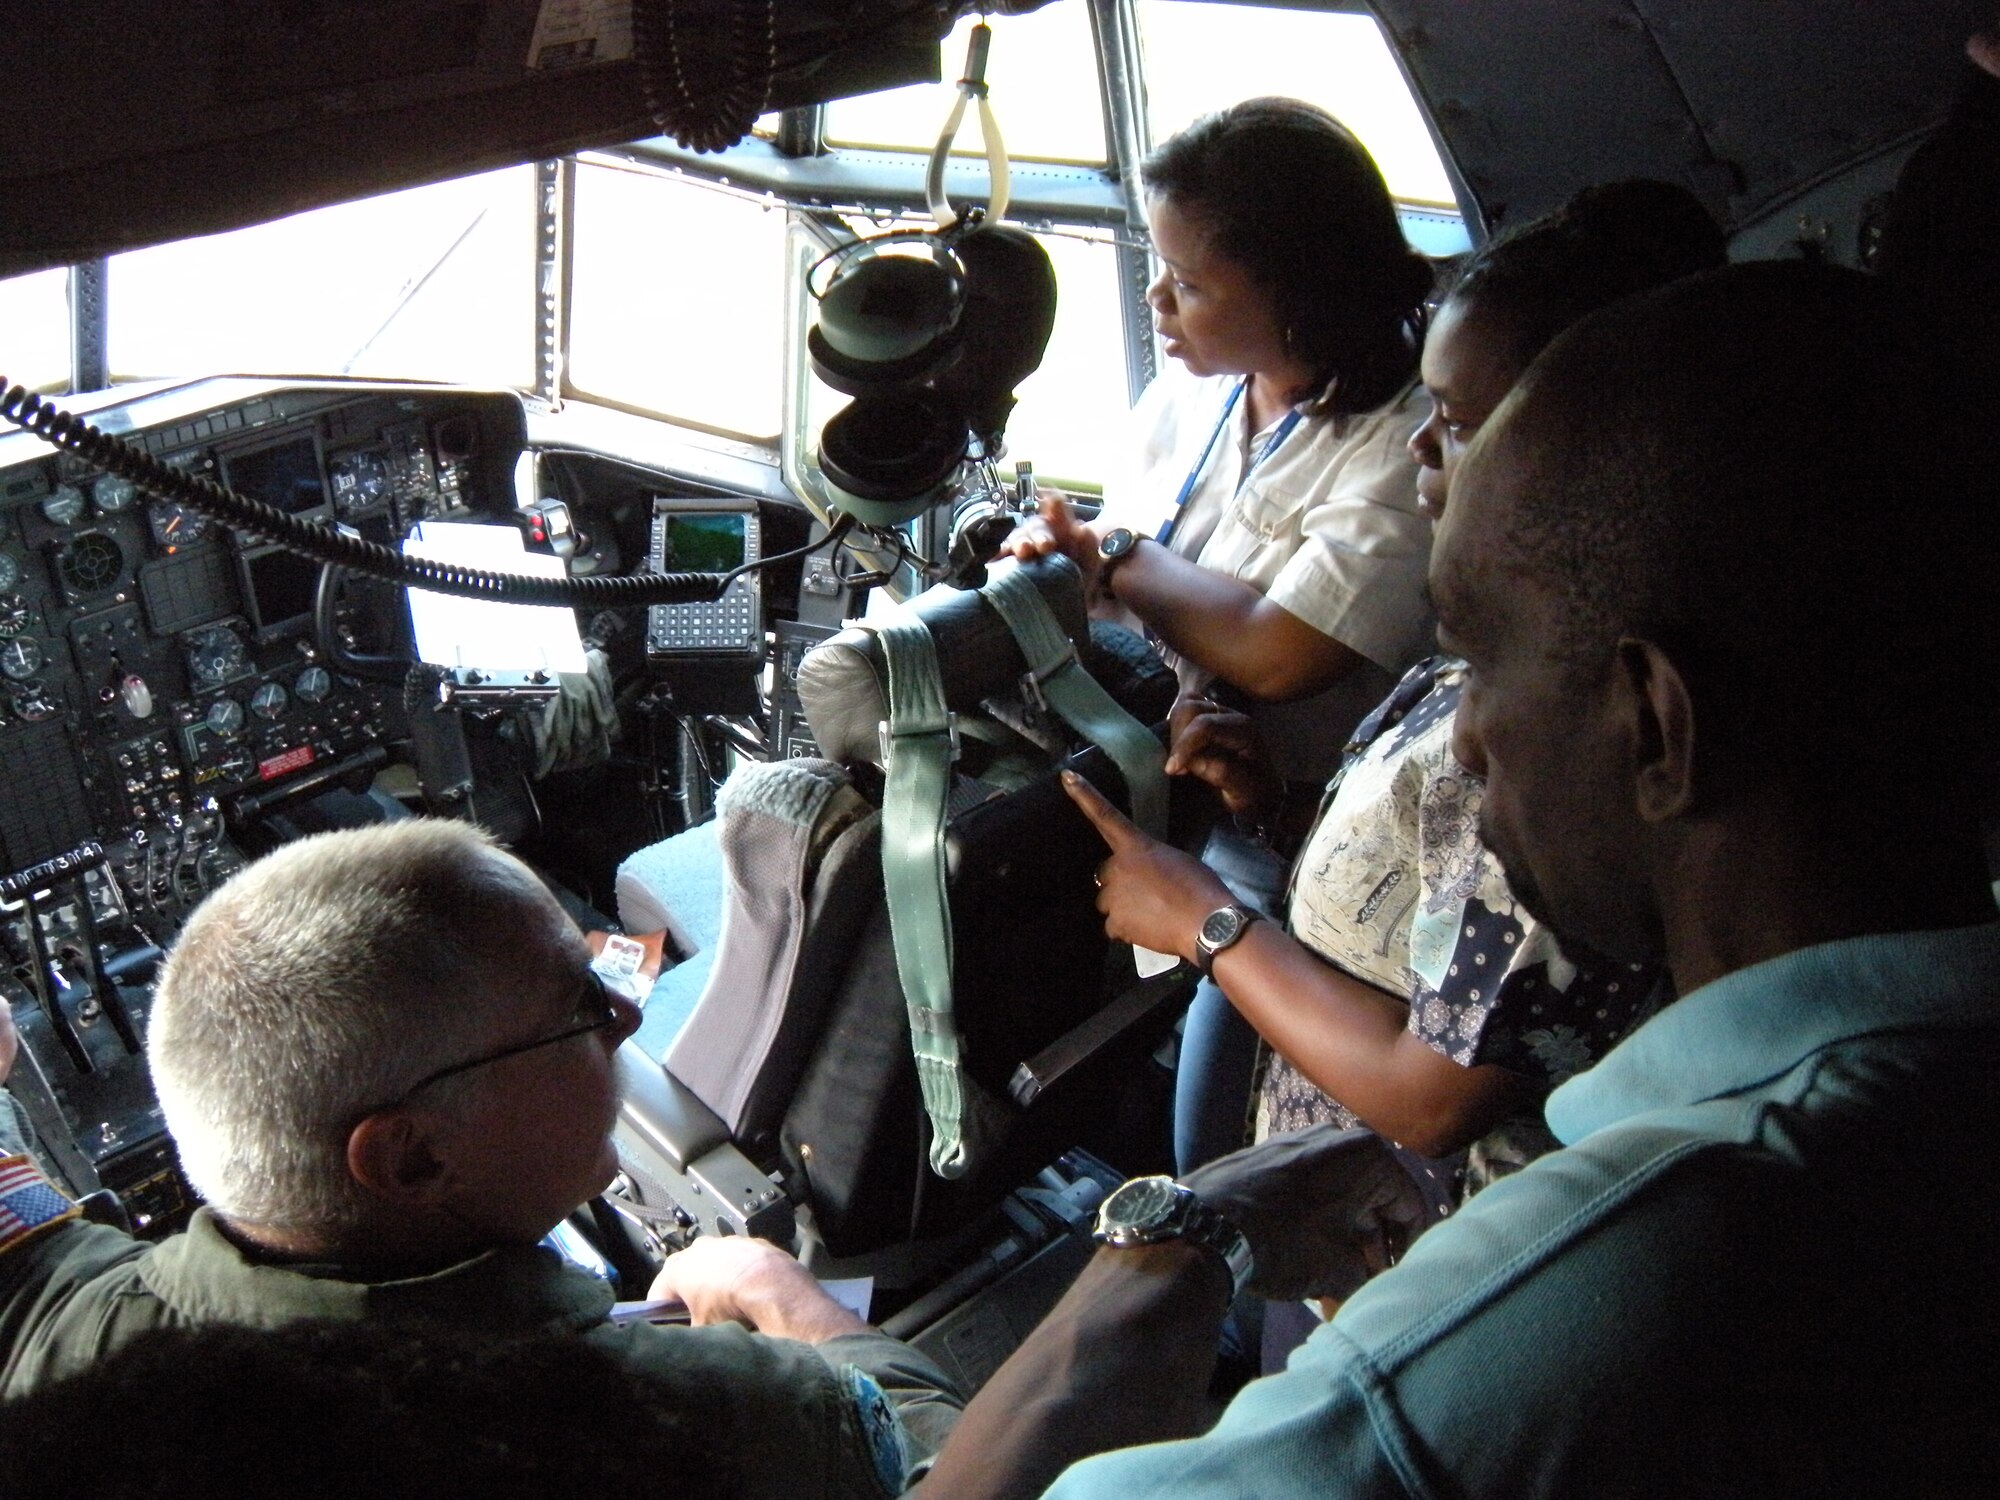 Master Sgt. Ray Wiebe, a C-130 Hercules flight engineer, gives a tour off the aircraft to local officials Oct. 30 after the delivery of humanitarian supplies to the Caribbean island of St. Vincent. The supplies, donated by Wausau, Wis. based Good News Project, included hospital and mental health supplies as well as desks, paper and school supplies to various locations on the island. The Air Force Reserve aircraft transported the supplies under the Denton Amendment, which authorizes U.S. military aircraft via Congress to airlift humanitarian supplies based on space availability and other factors. The C-130 is assigned to the Air Force Reserve Command's 302nd Airlift Wing based at Peterson Air Force Base, Colo. (U.S. Air Force photo/Staff Sgt. Stephen J. Collier)